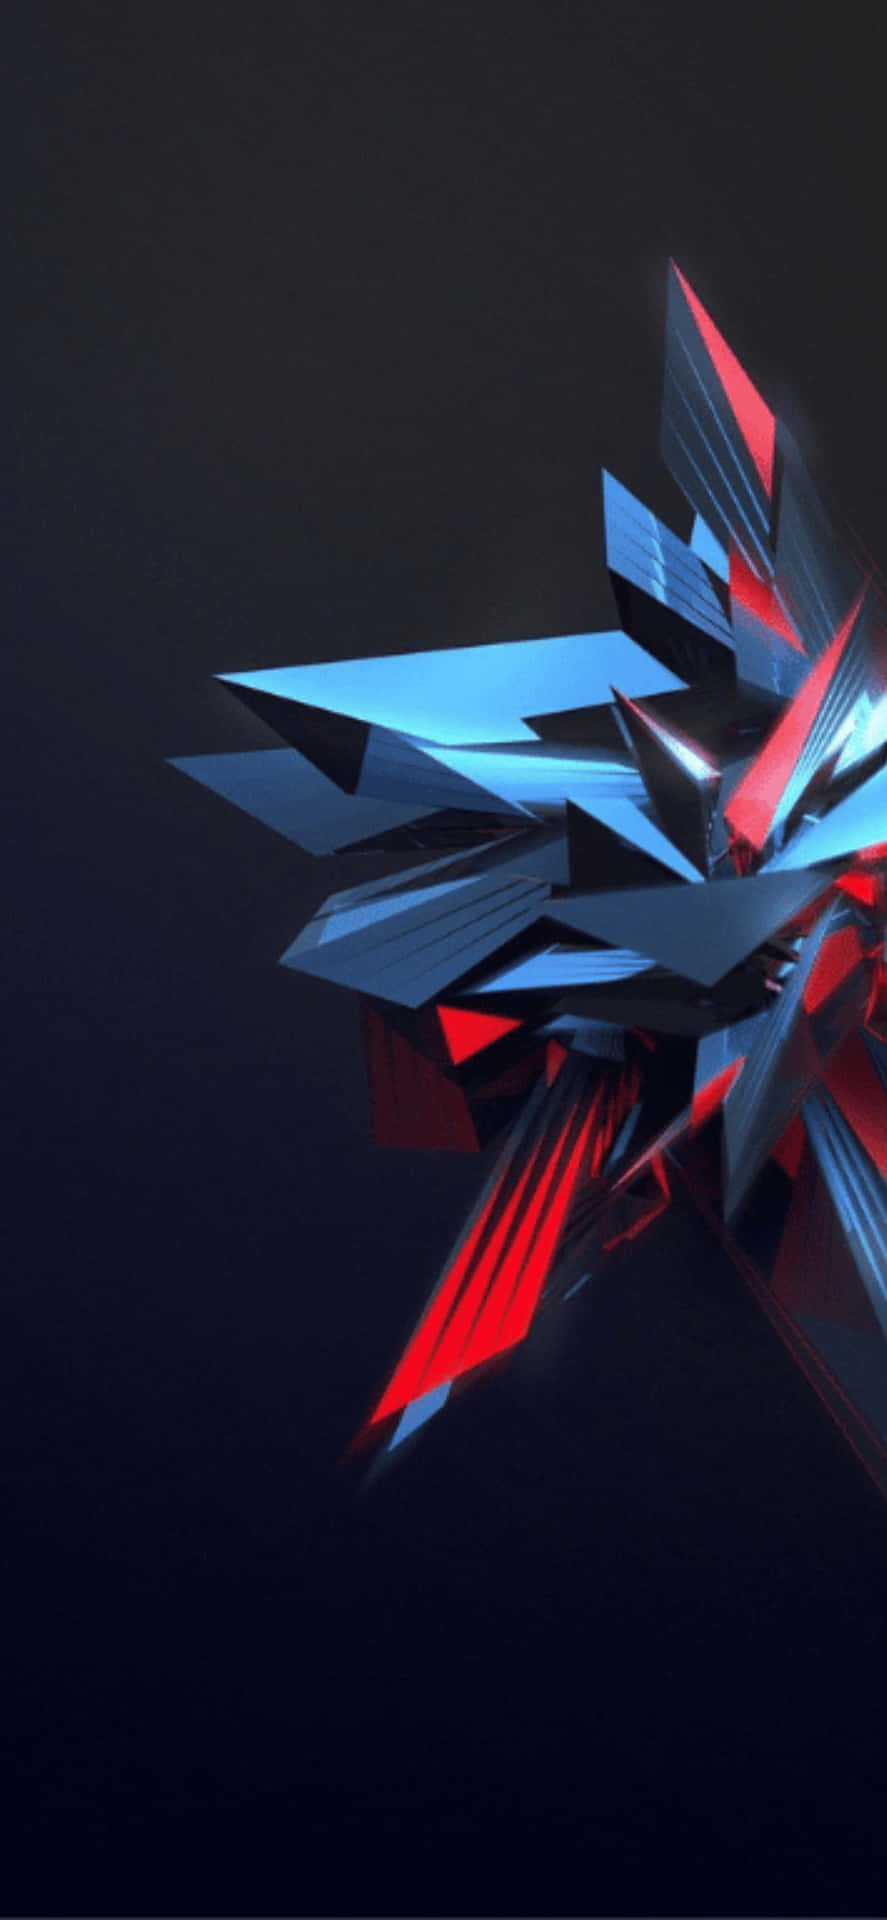 A Blue And Red Abstract Design On A Black Background